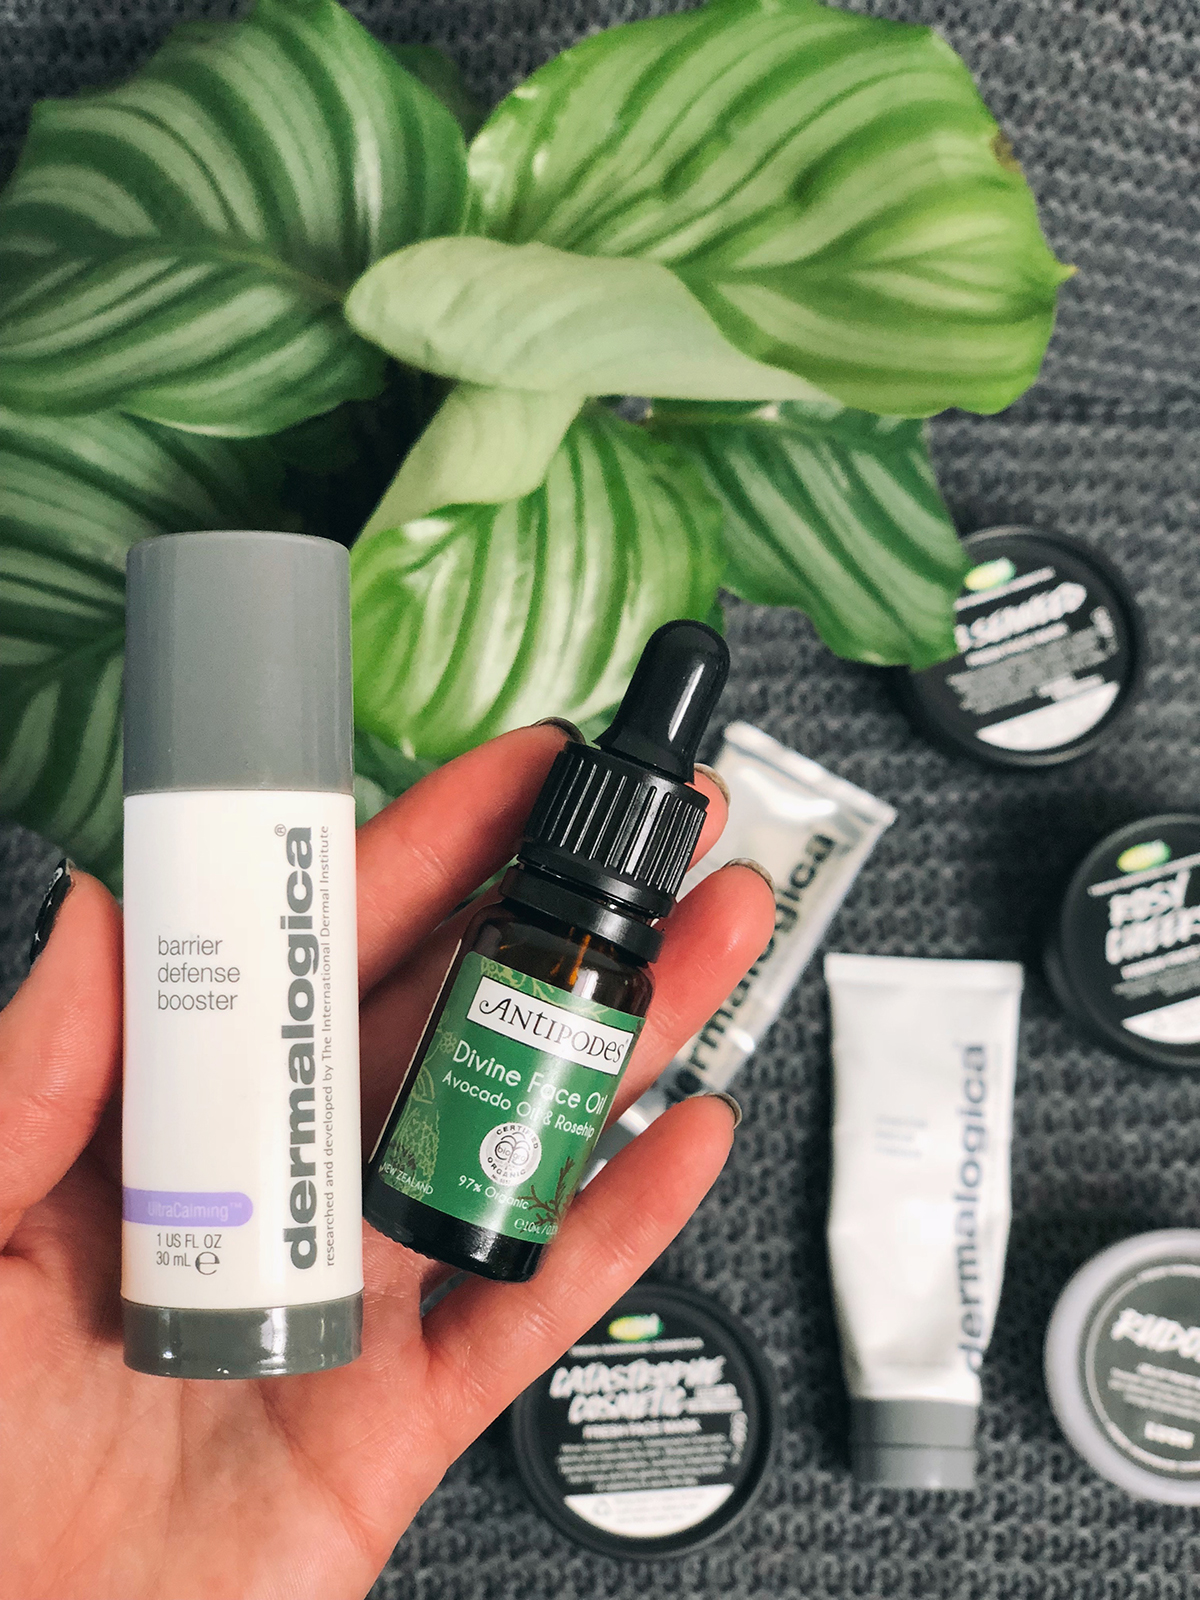 Skincare Routine for Dry and Sensitive Skin: Dermalogica Barrier Defense Booster in the morning and Antipodes Organic Divine Face Oil in the evening